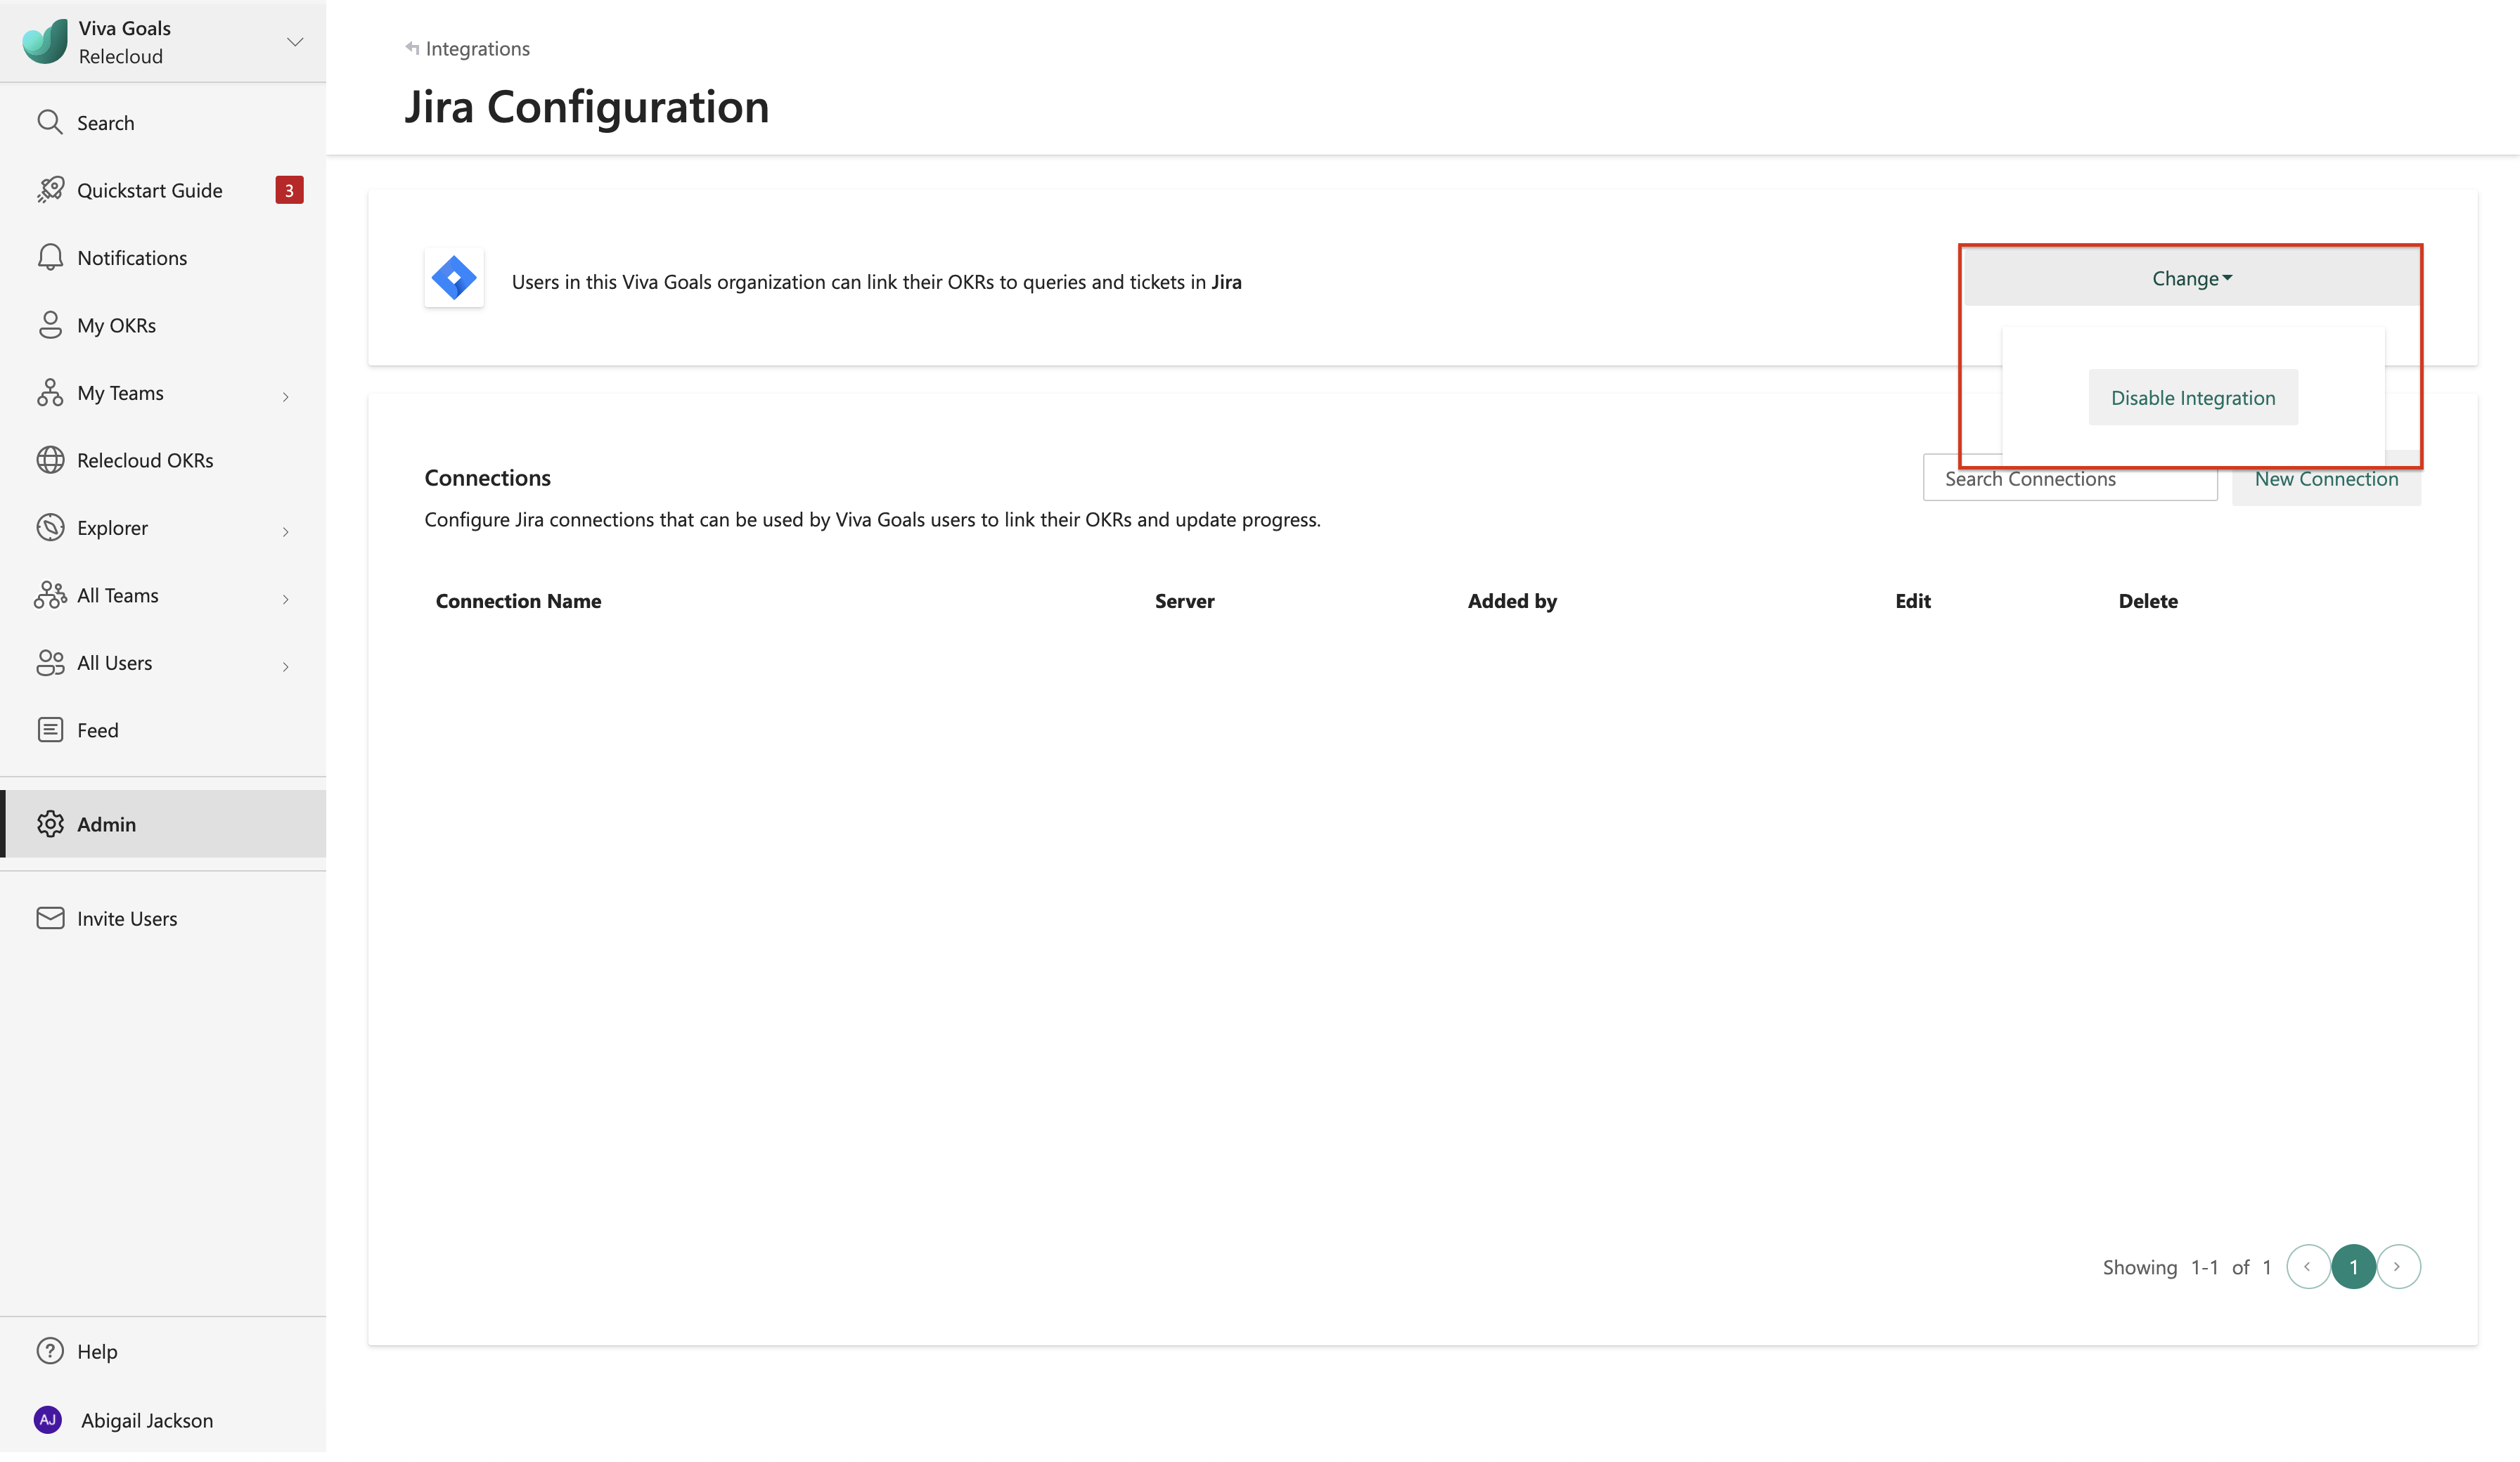 Screenshot shows how to disable Jira in Viva Goals.